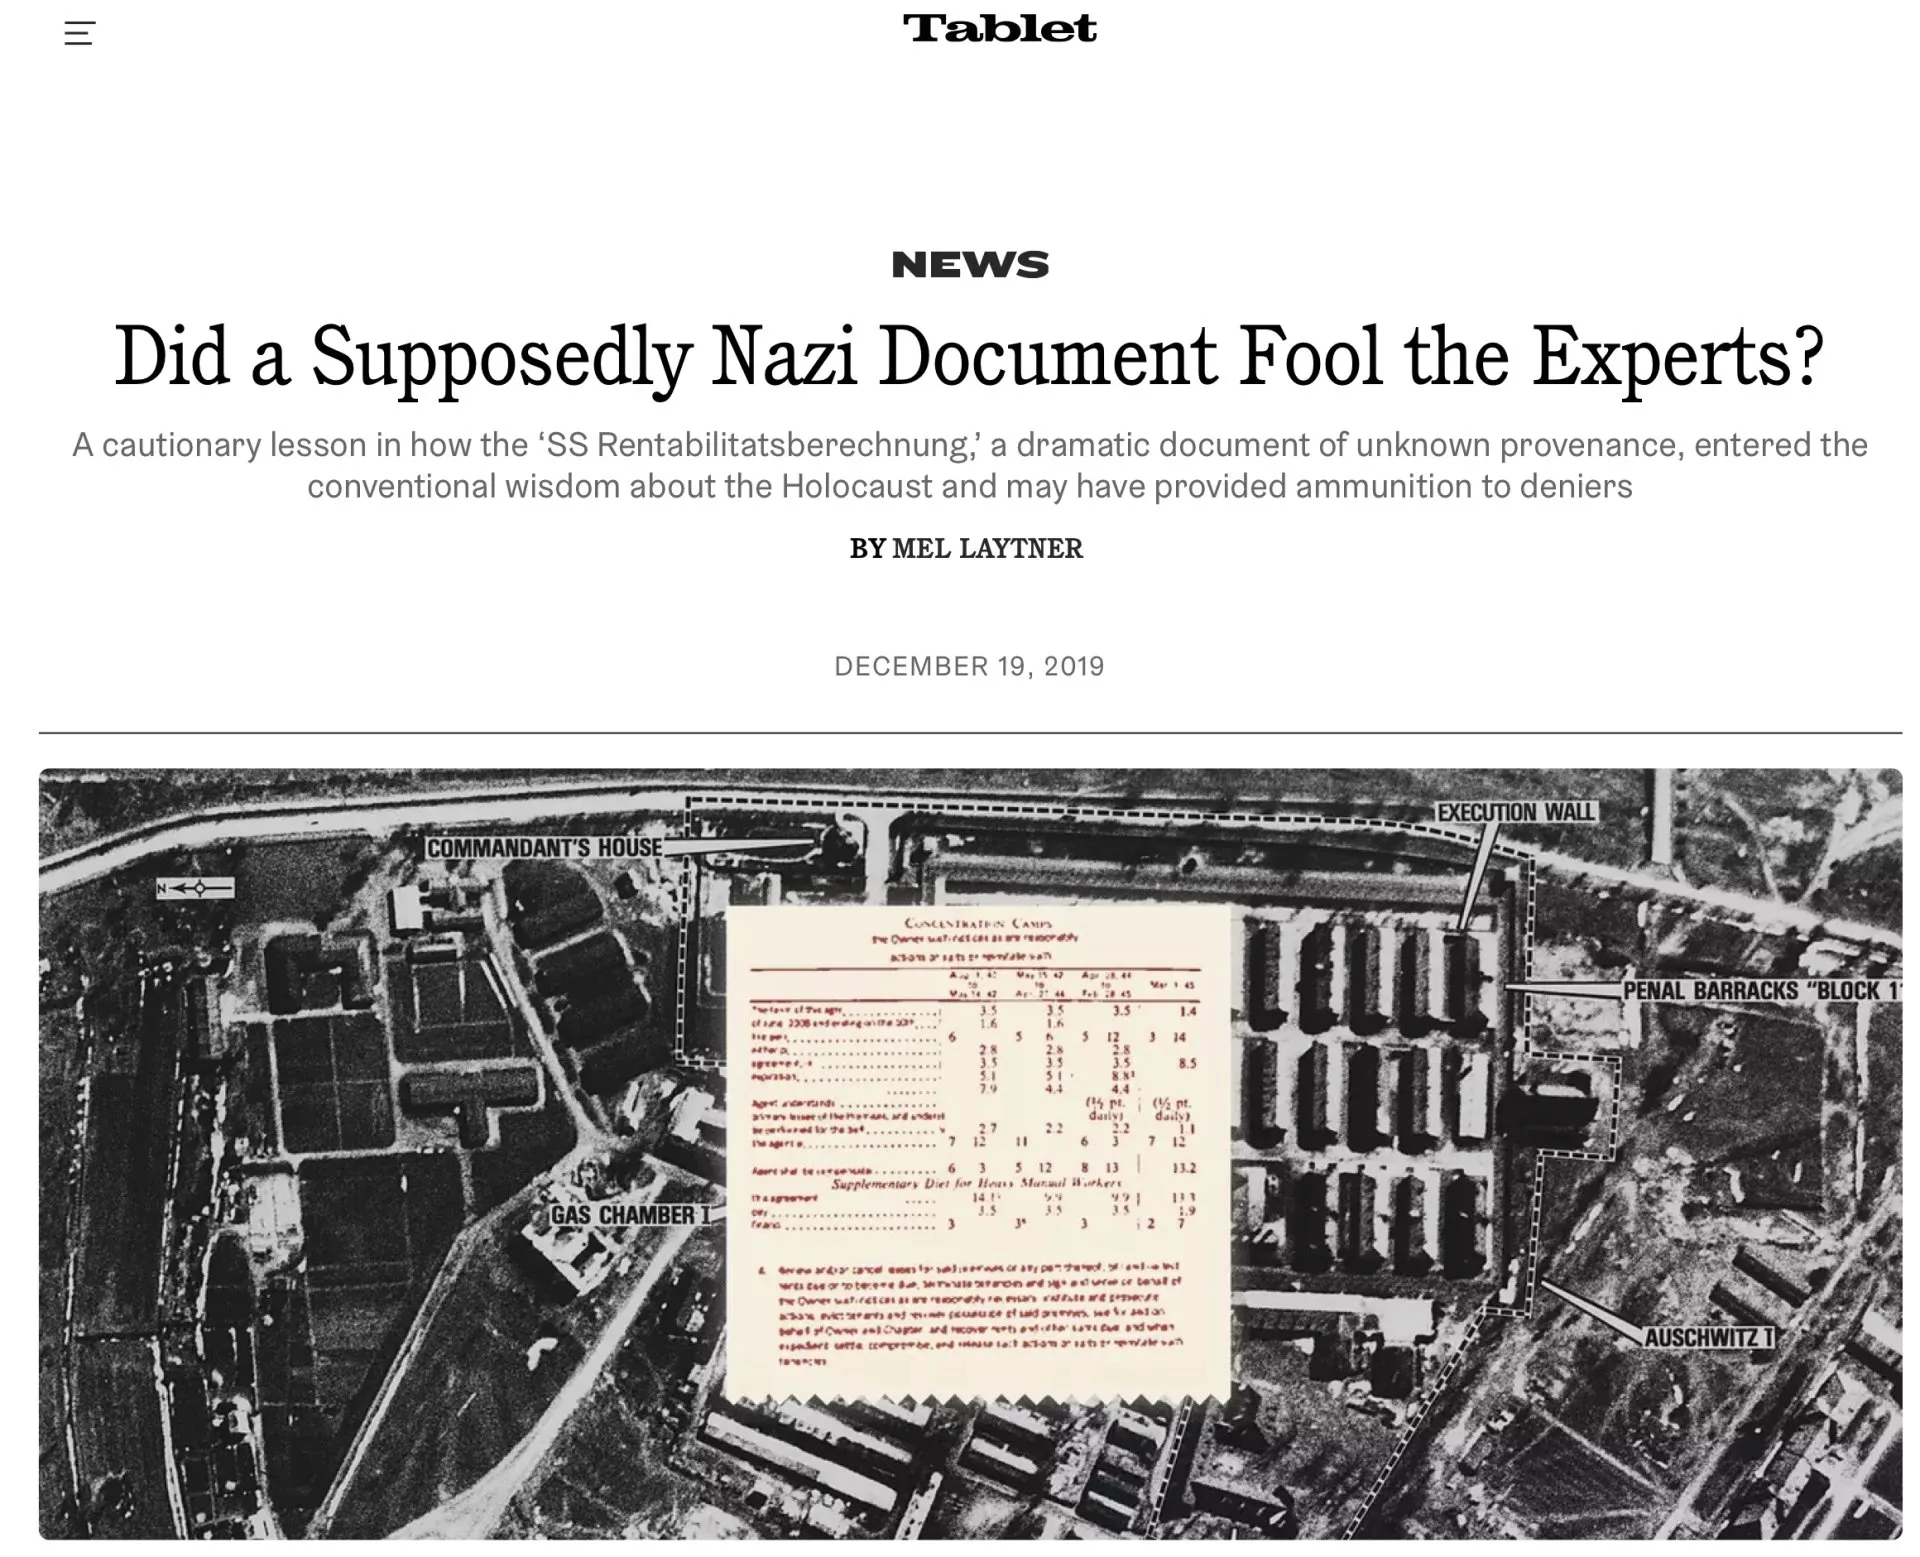 Mel Laytner Did a Questionable Nazi document Fool the Experts - Tablet Magazine